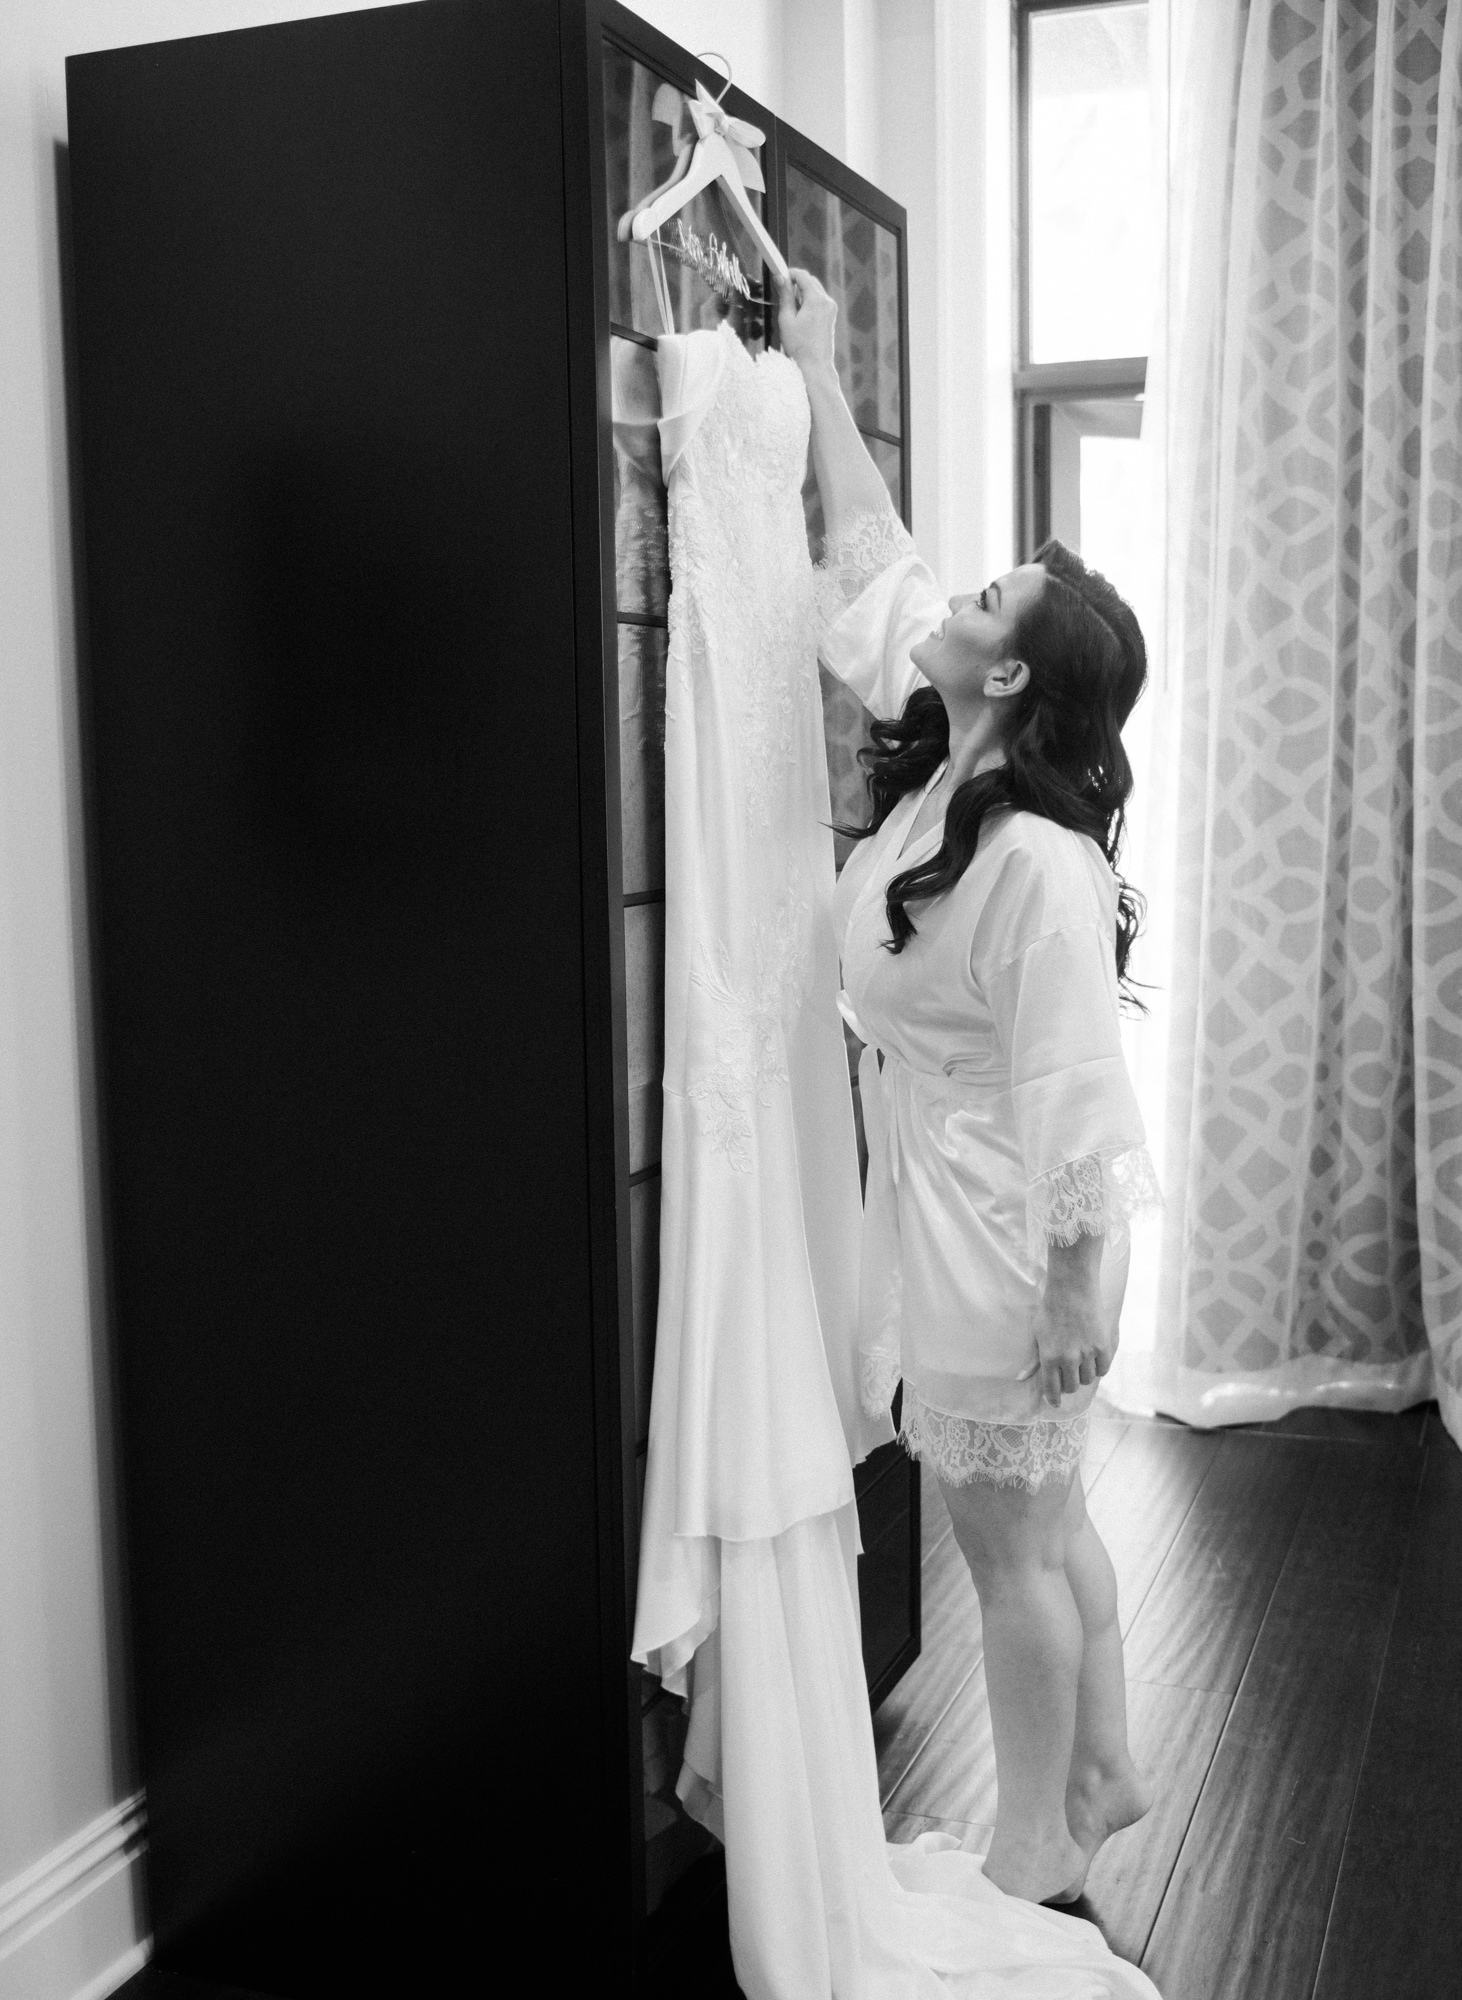 Bride reaching for her wedding gown